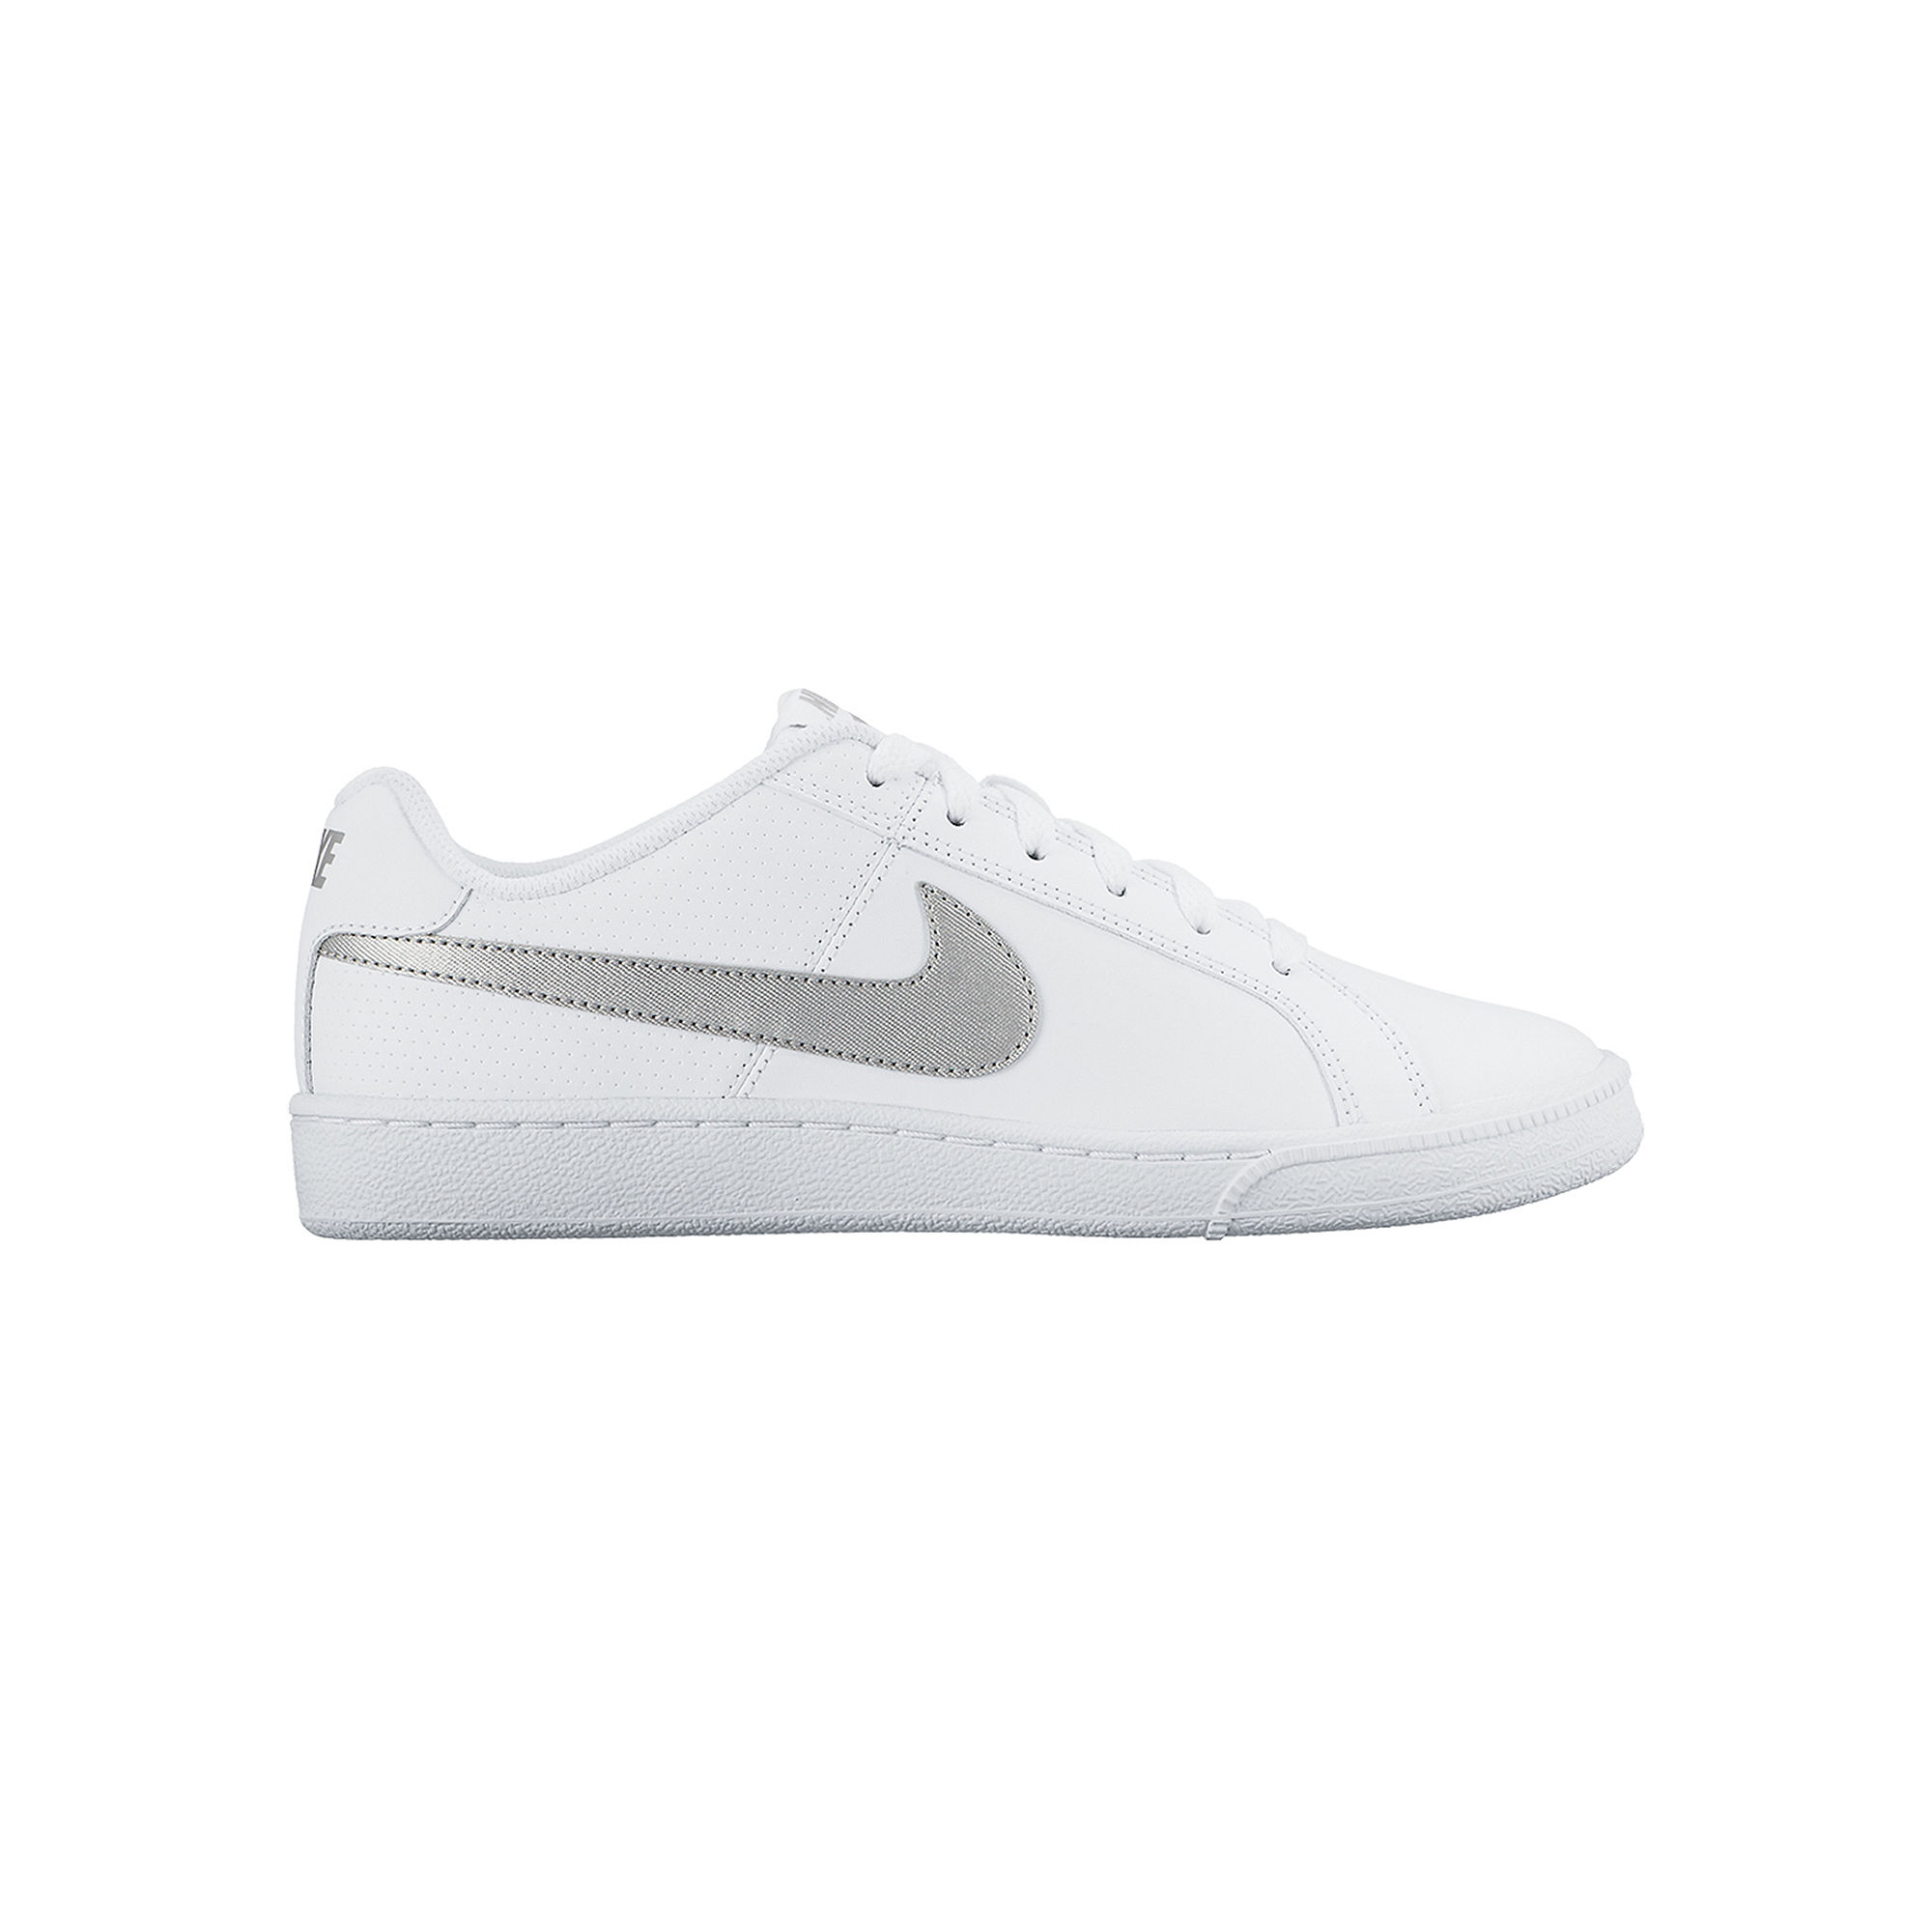 UPC 091201703289 product image for Nike Court Royal Womens Tennis Shoes | upcitemdb.com